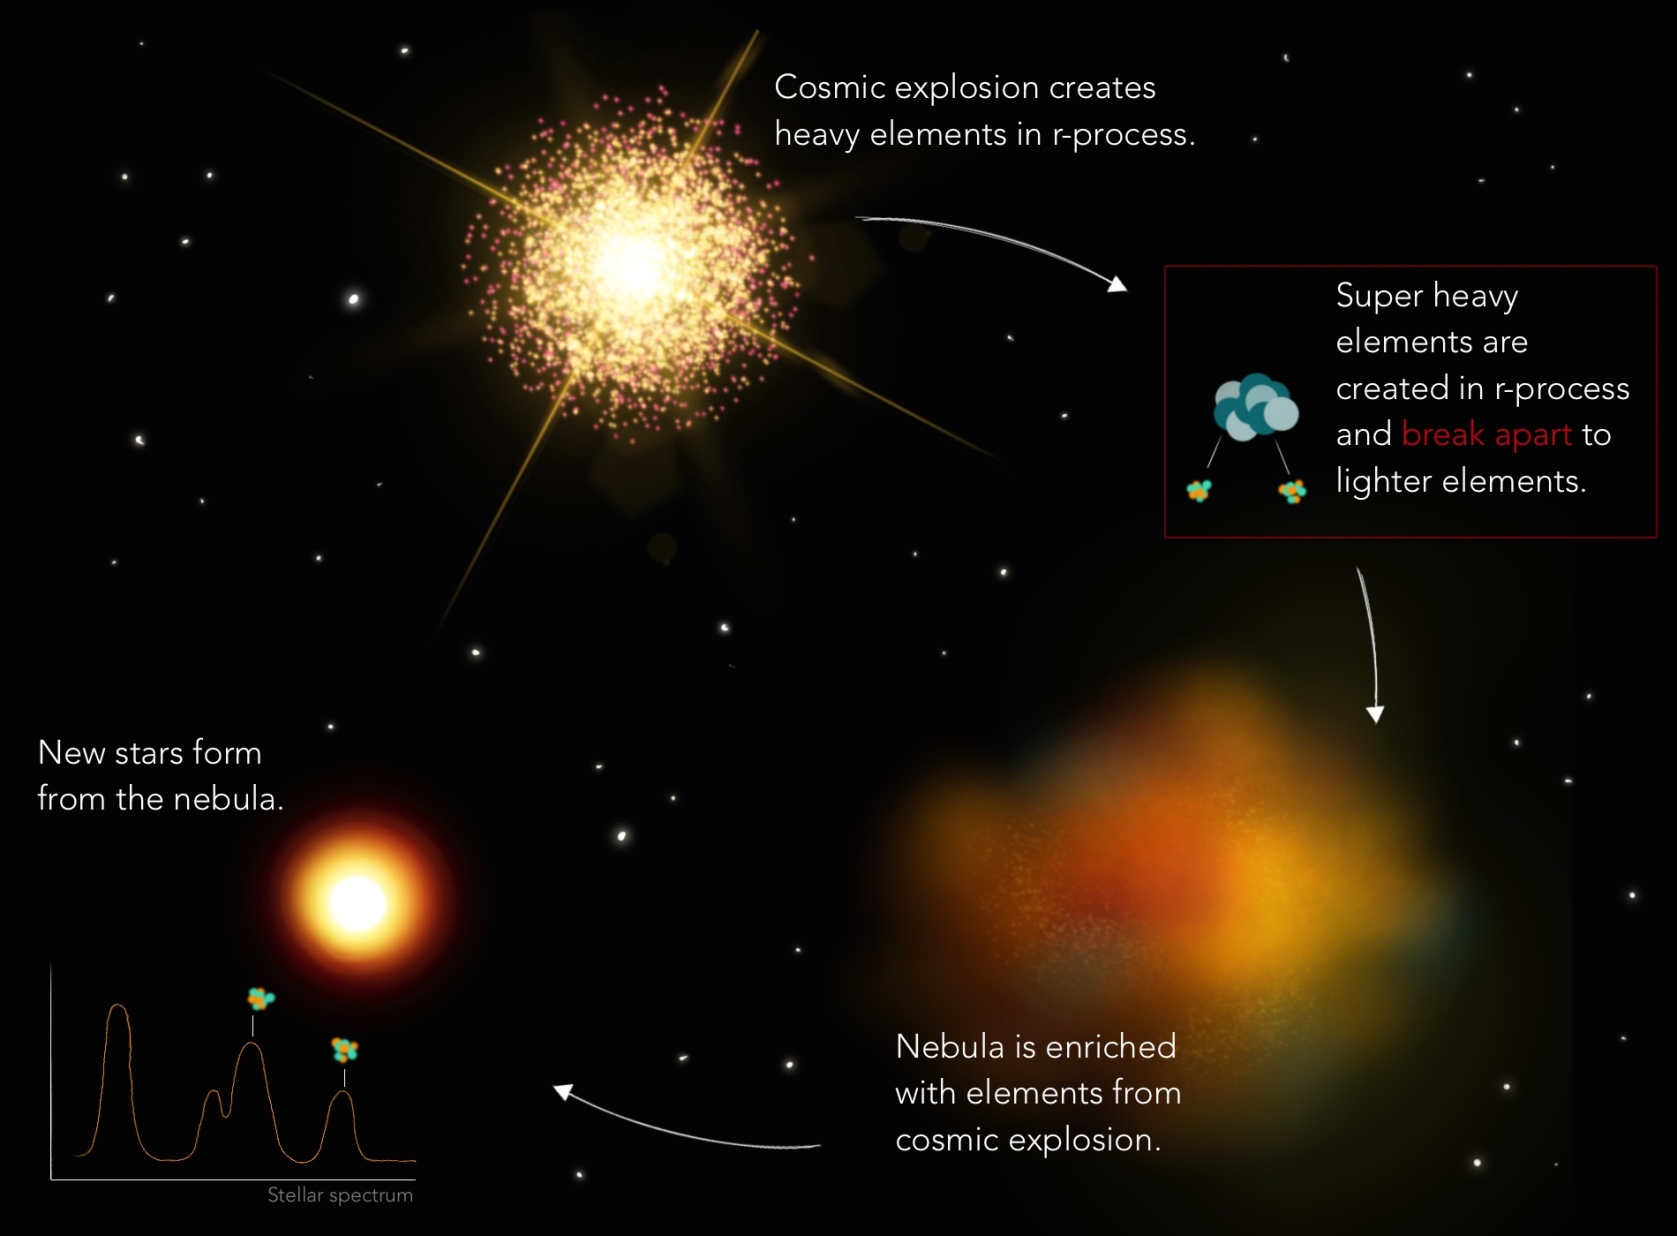 Astronomers have succeeded in deciphering the composition of very heavy elements in the universe.